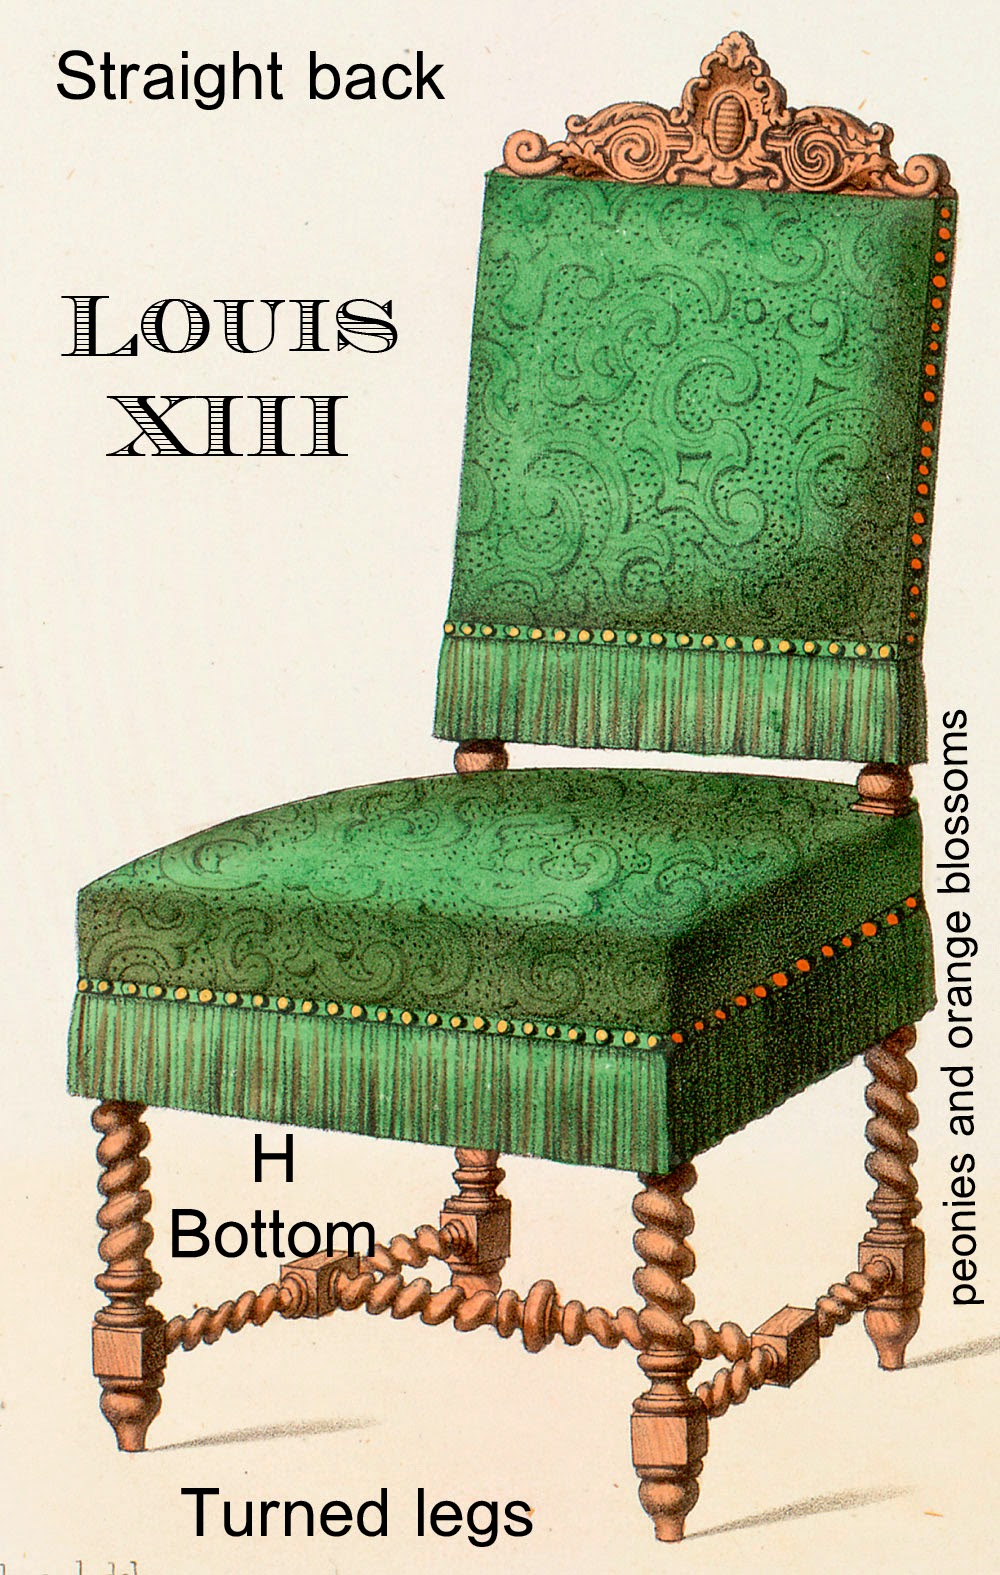 How to Identify Louis Chair Types